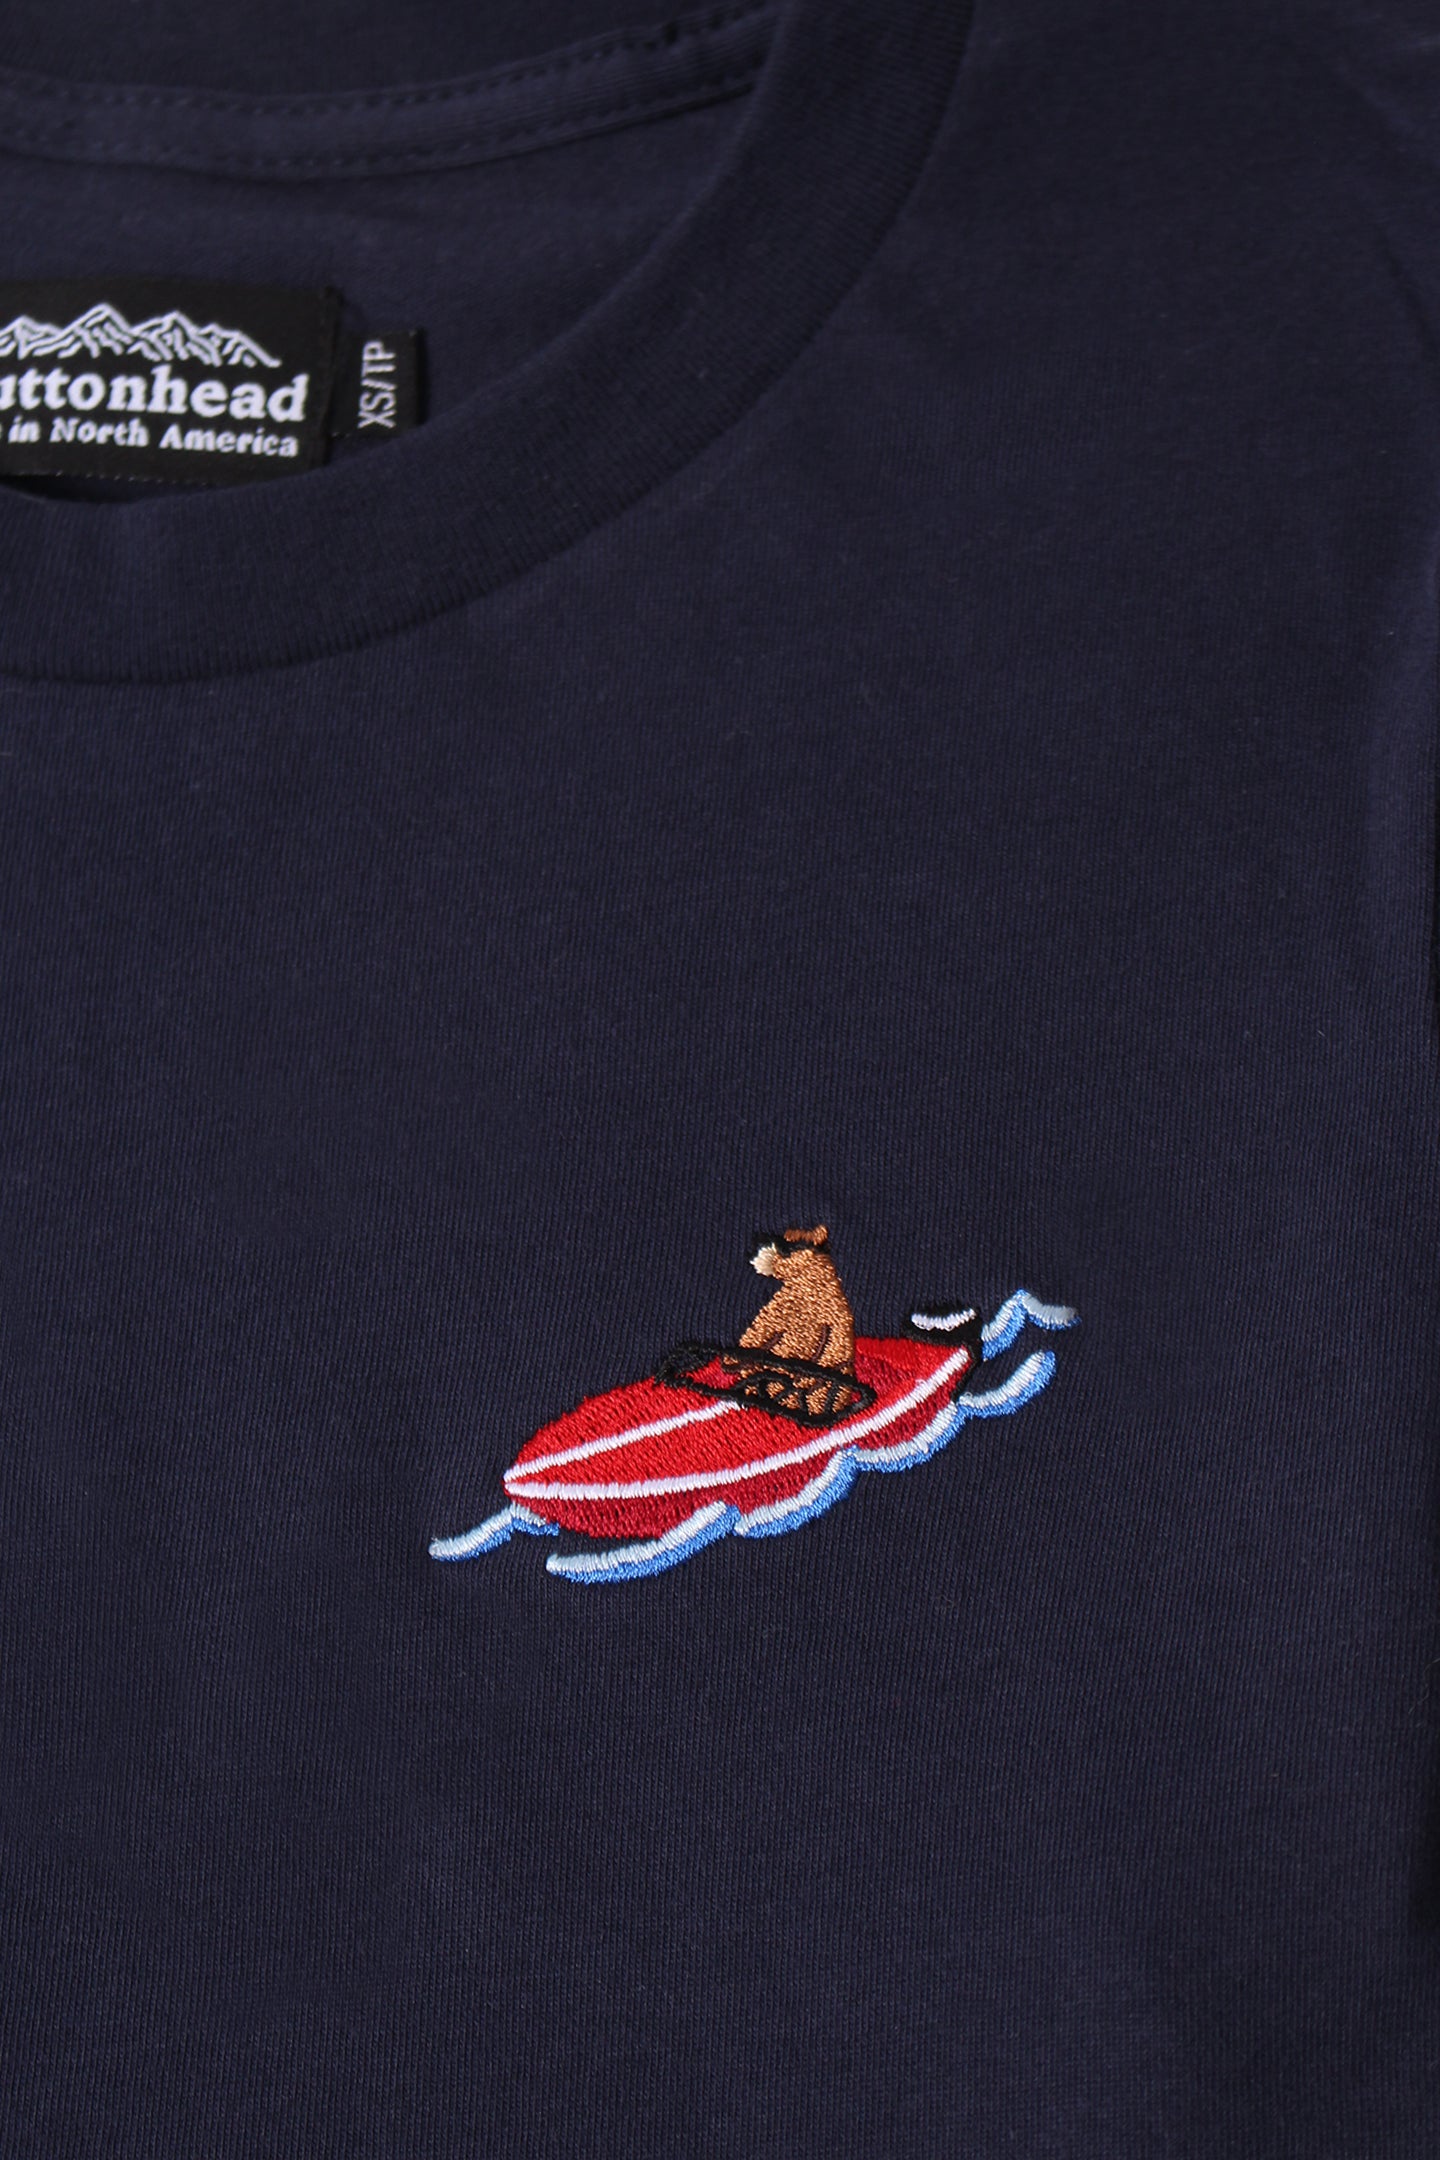 Classic Tee - Navy - Boat Bear Embroidery